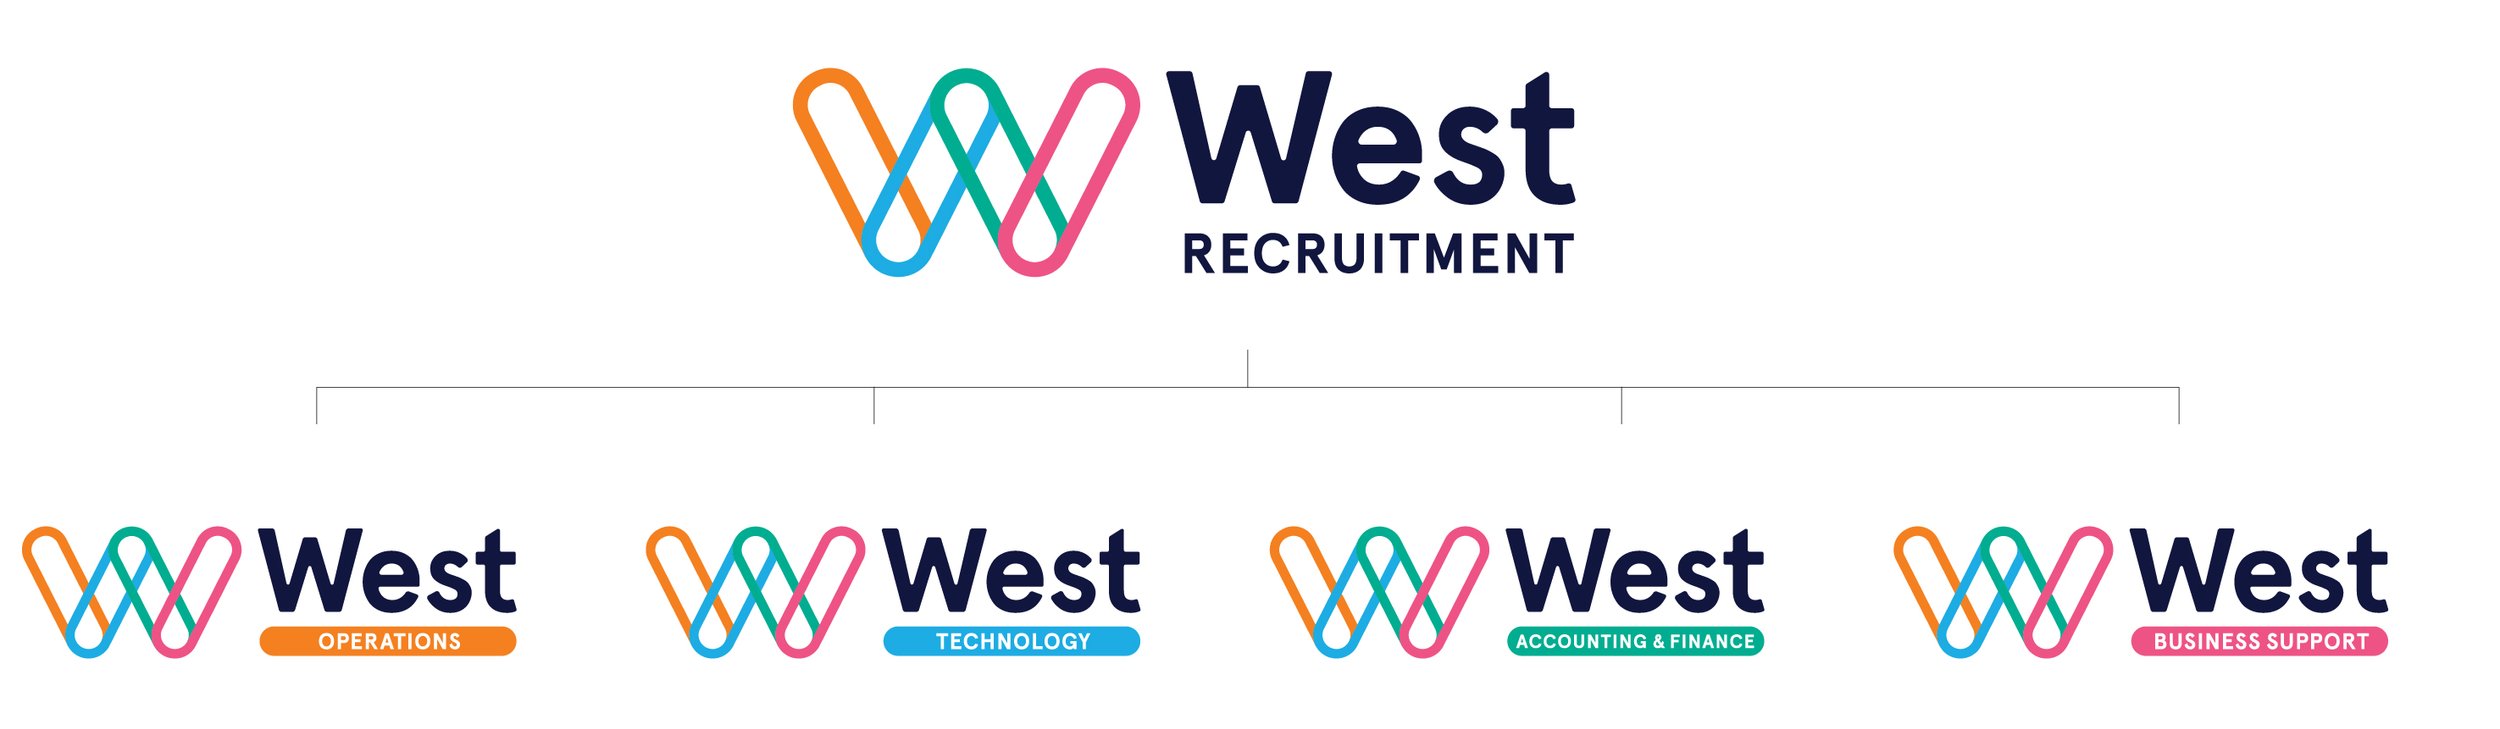 West Recruitment logo and various sectors